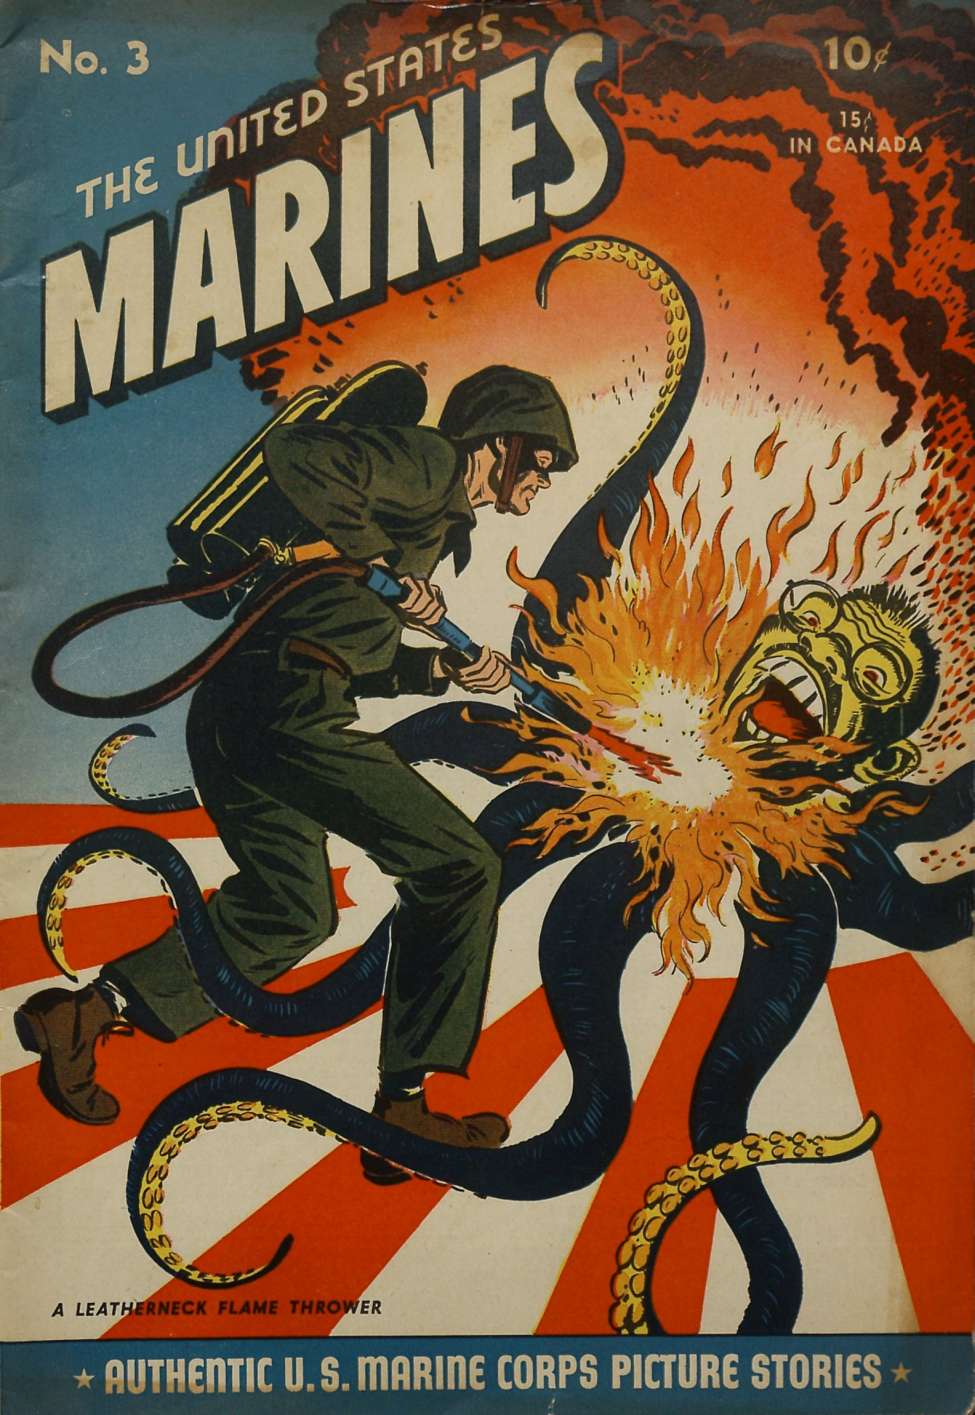 Book Cover For The United States Marines 3 - Version 2